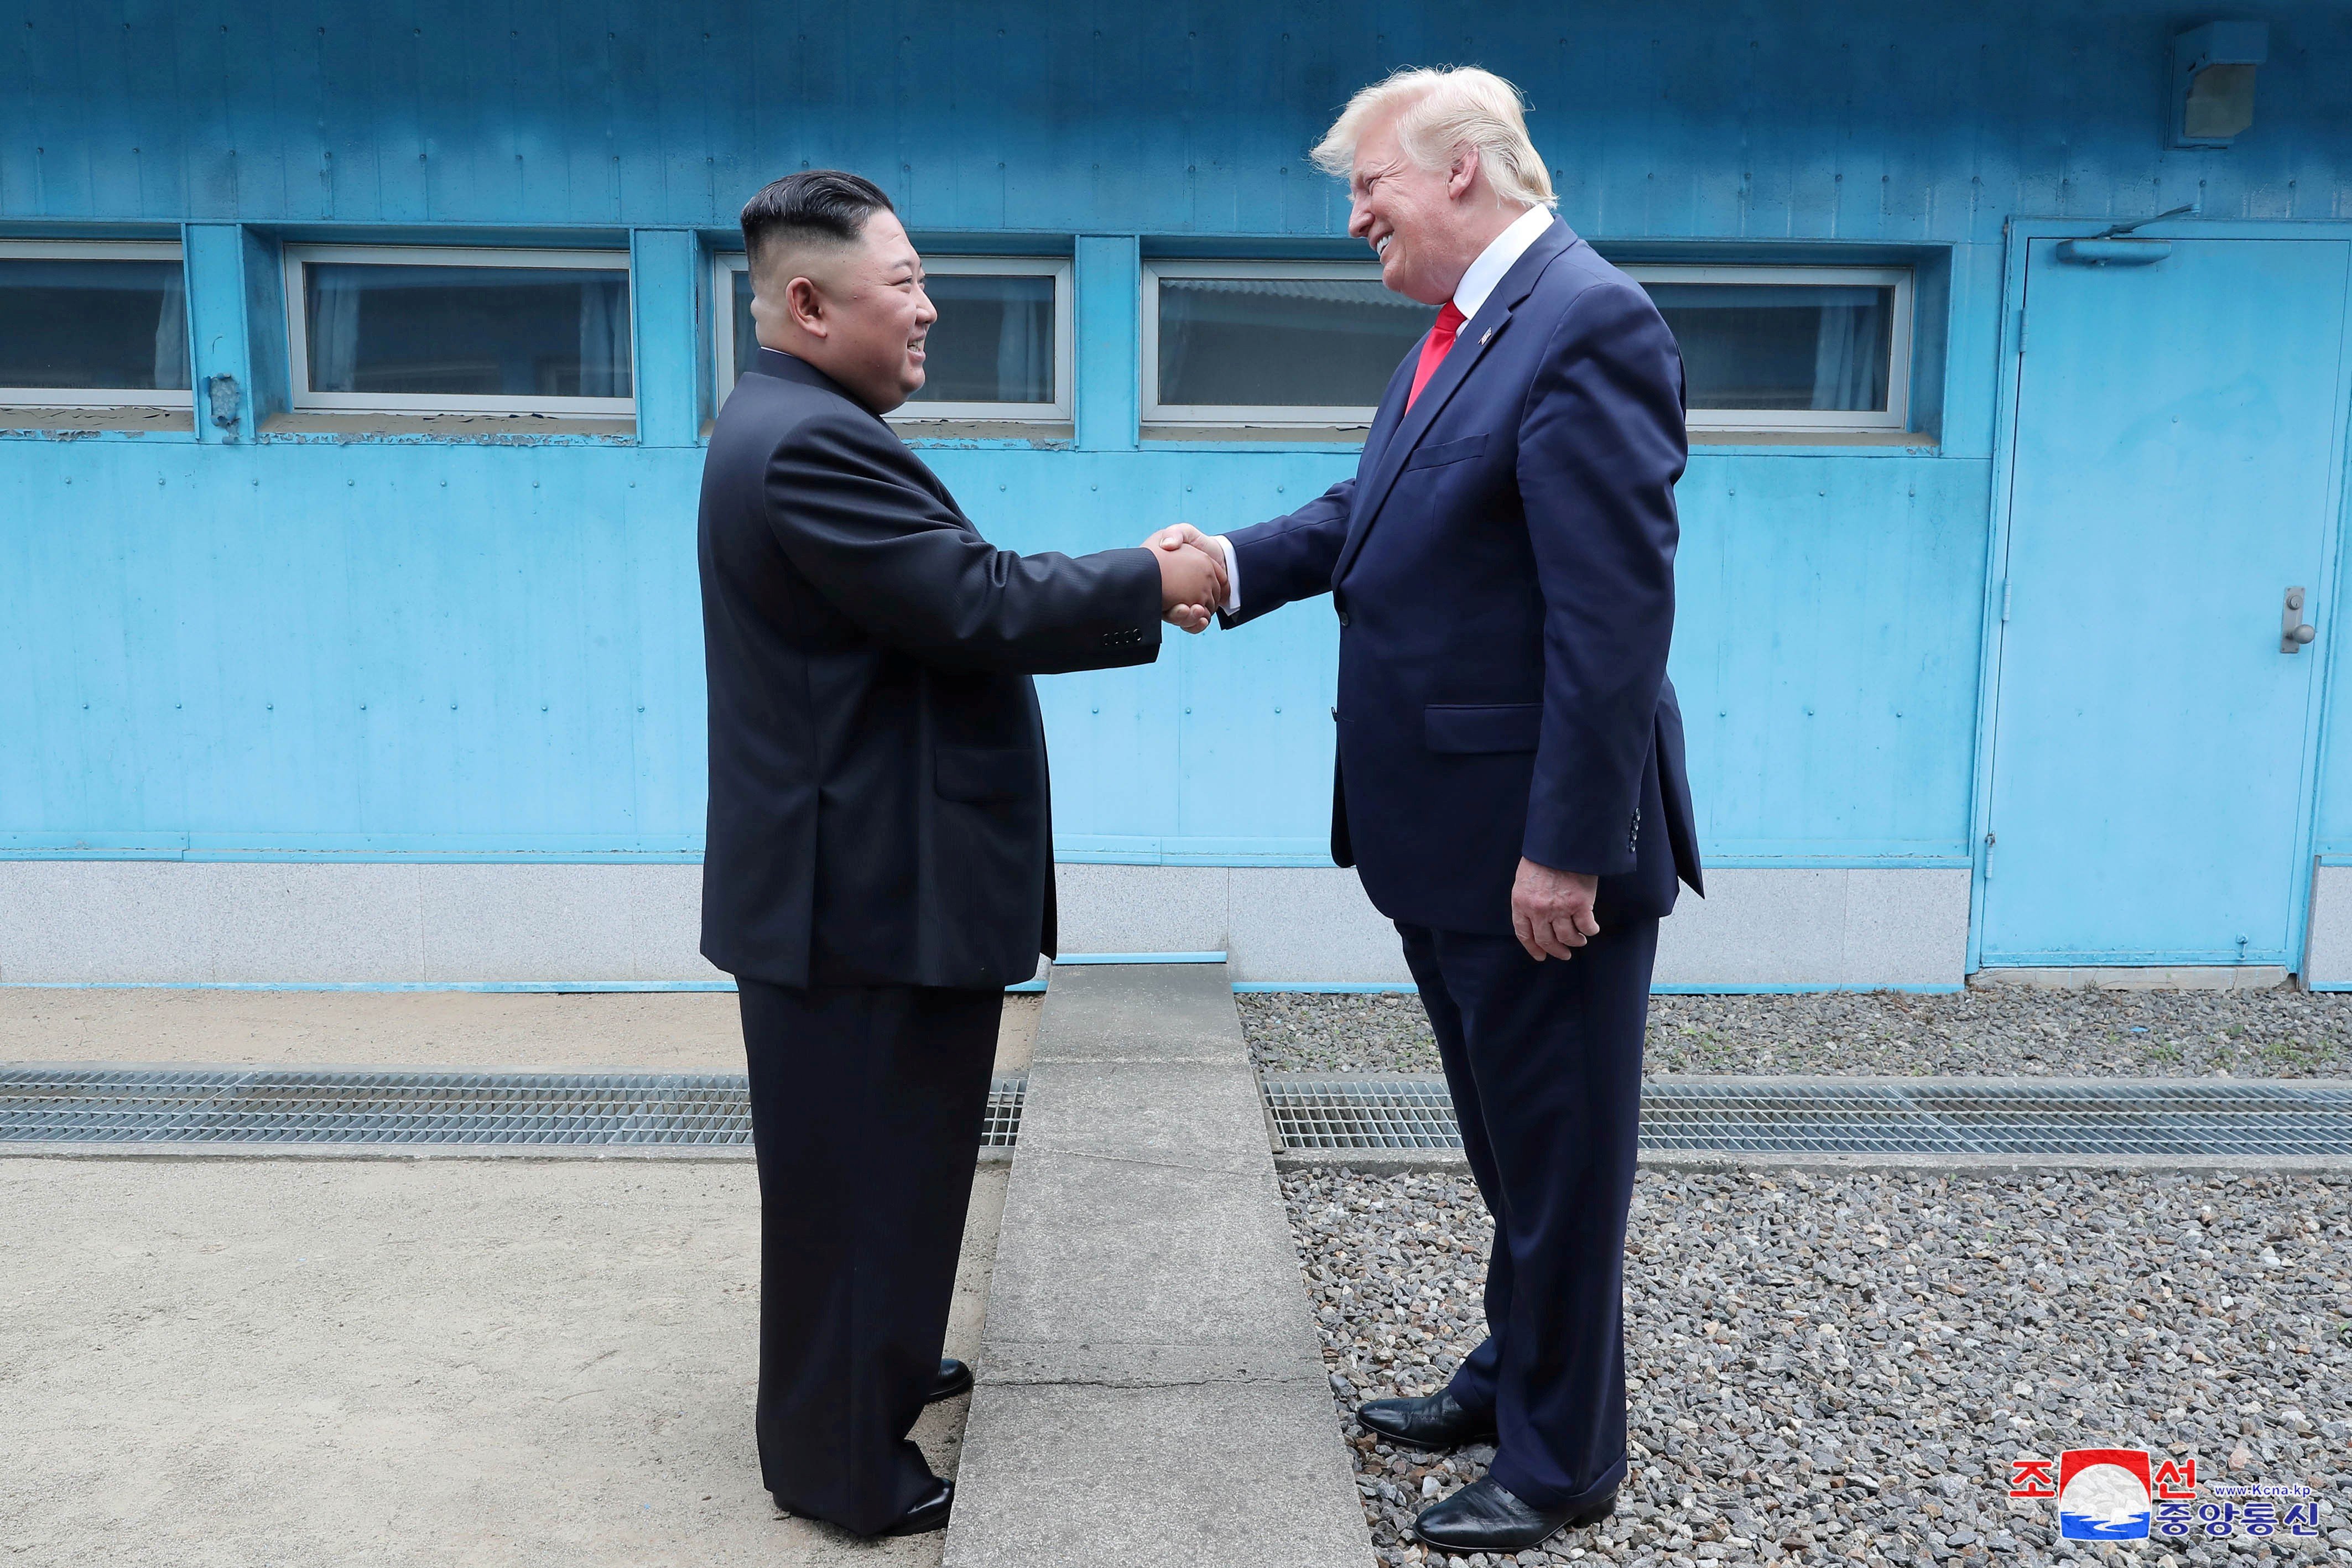 North Korean leader Kim Jong-un shakes hands with US President Donald Trump as they meet at the demilitarised zone separating the two Koreas on June 30. Photo: KCNA via Reuters